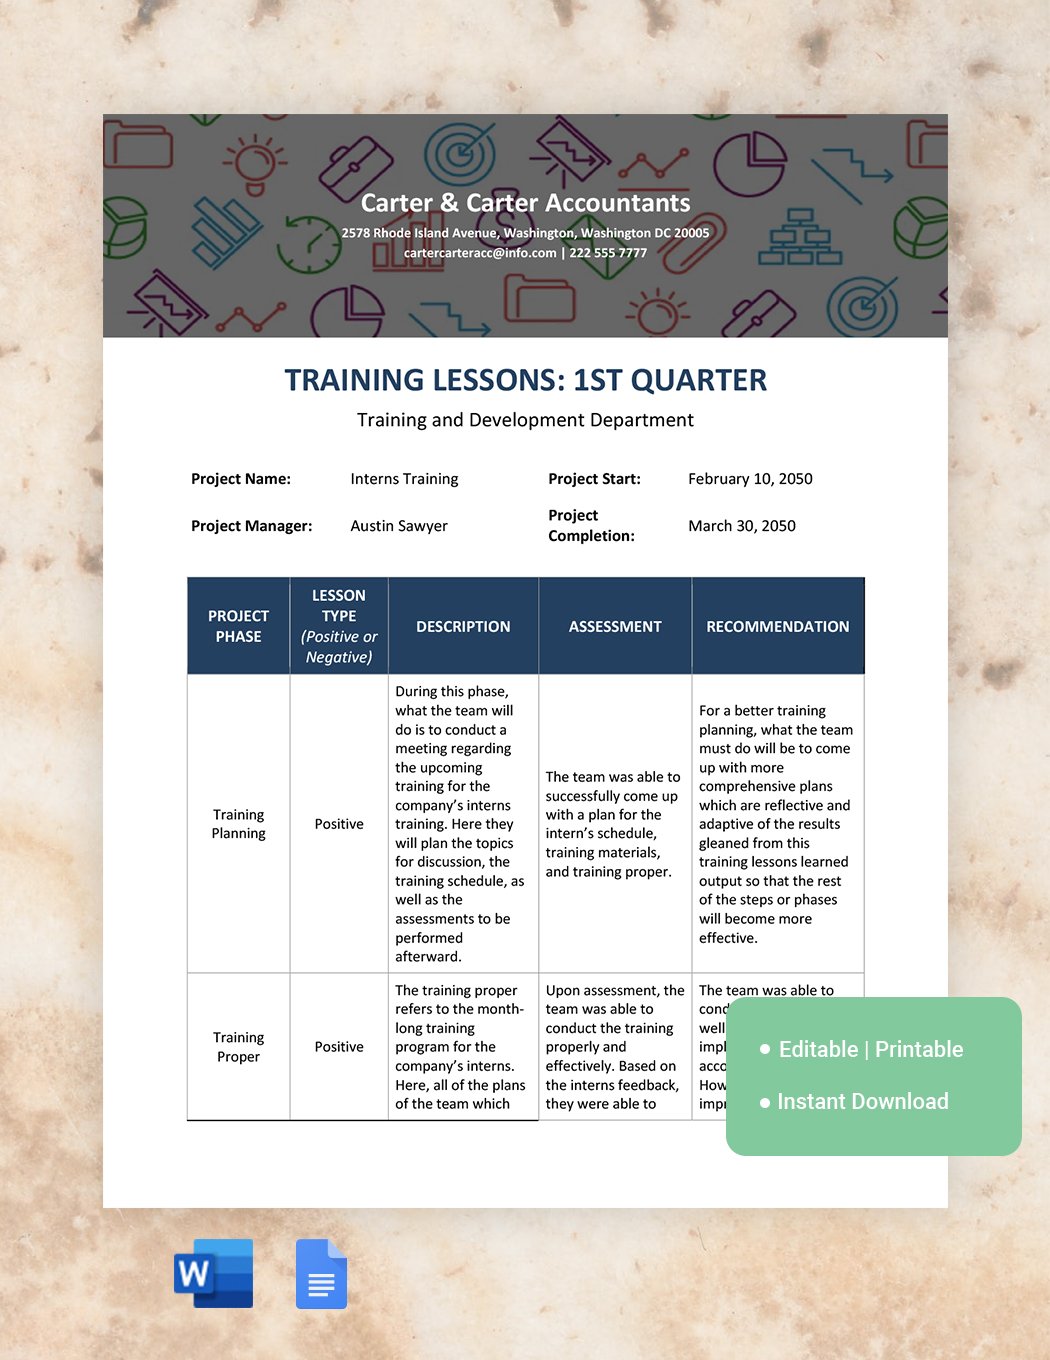 Free Training Lessons Learned Template in Word, Google Docs